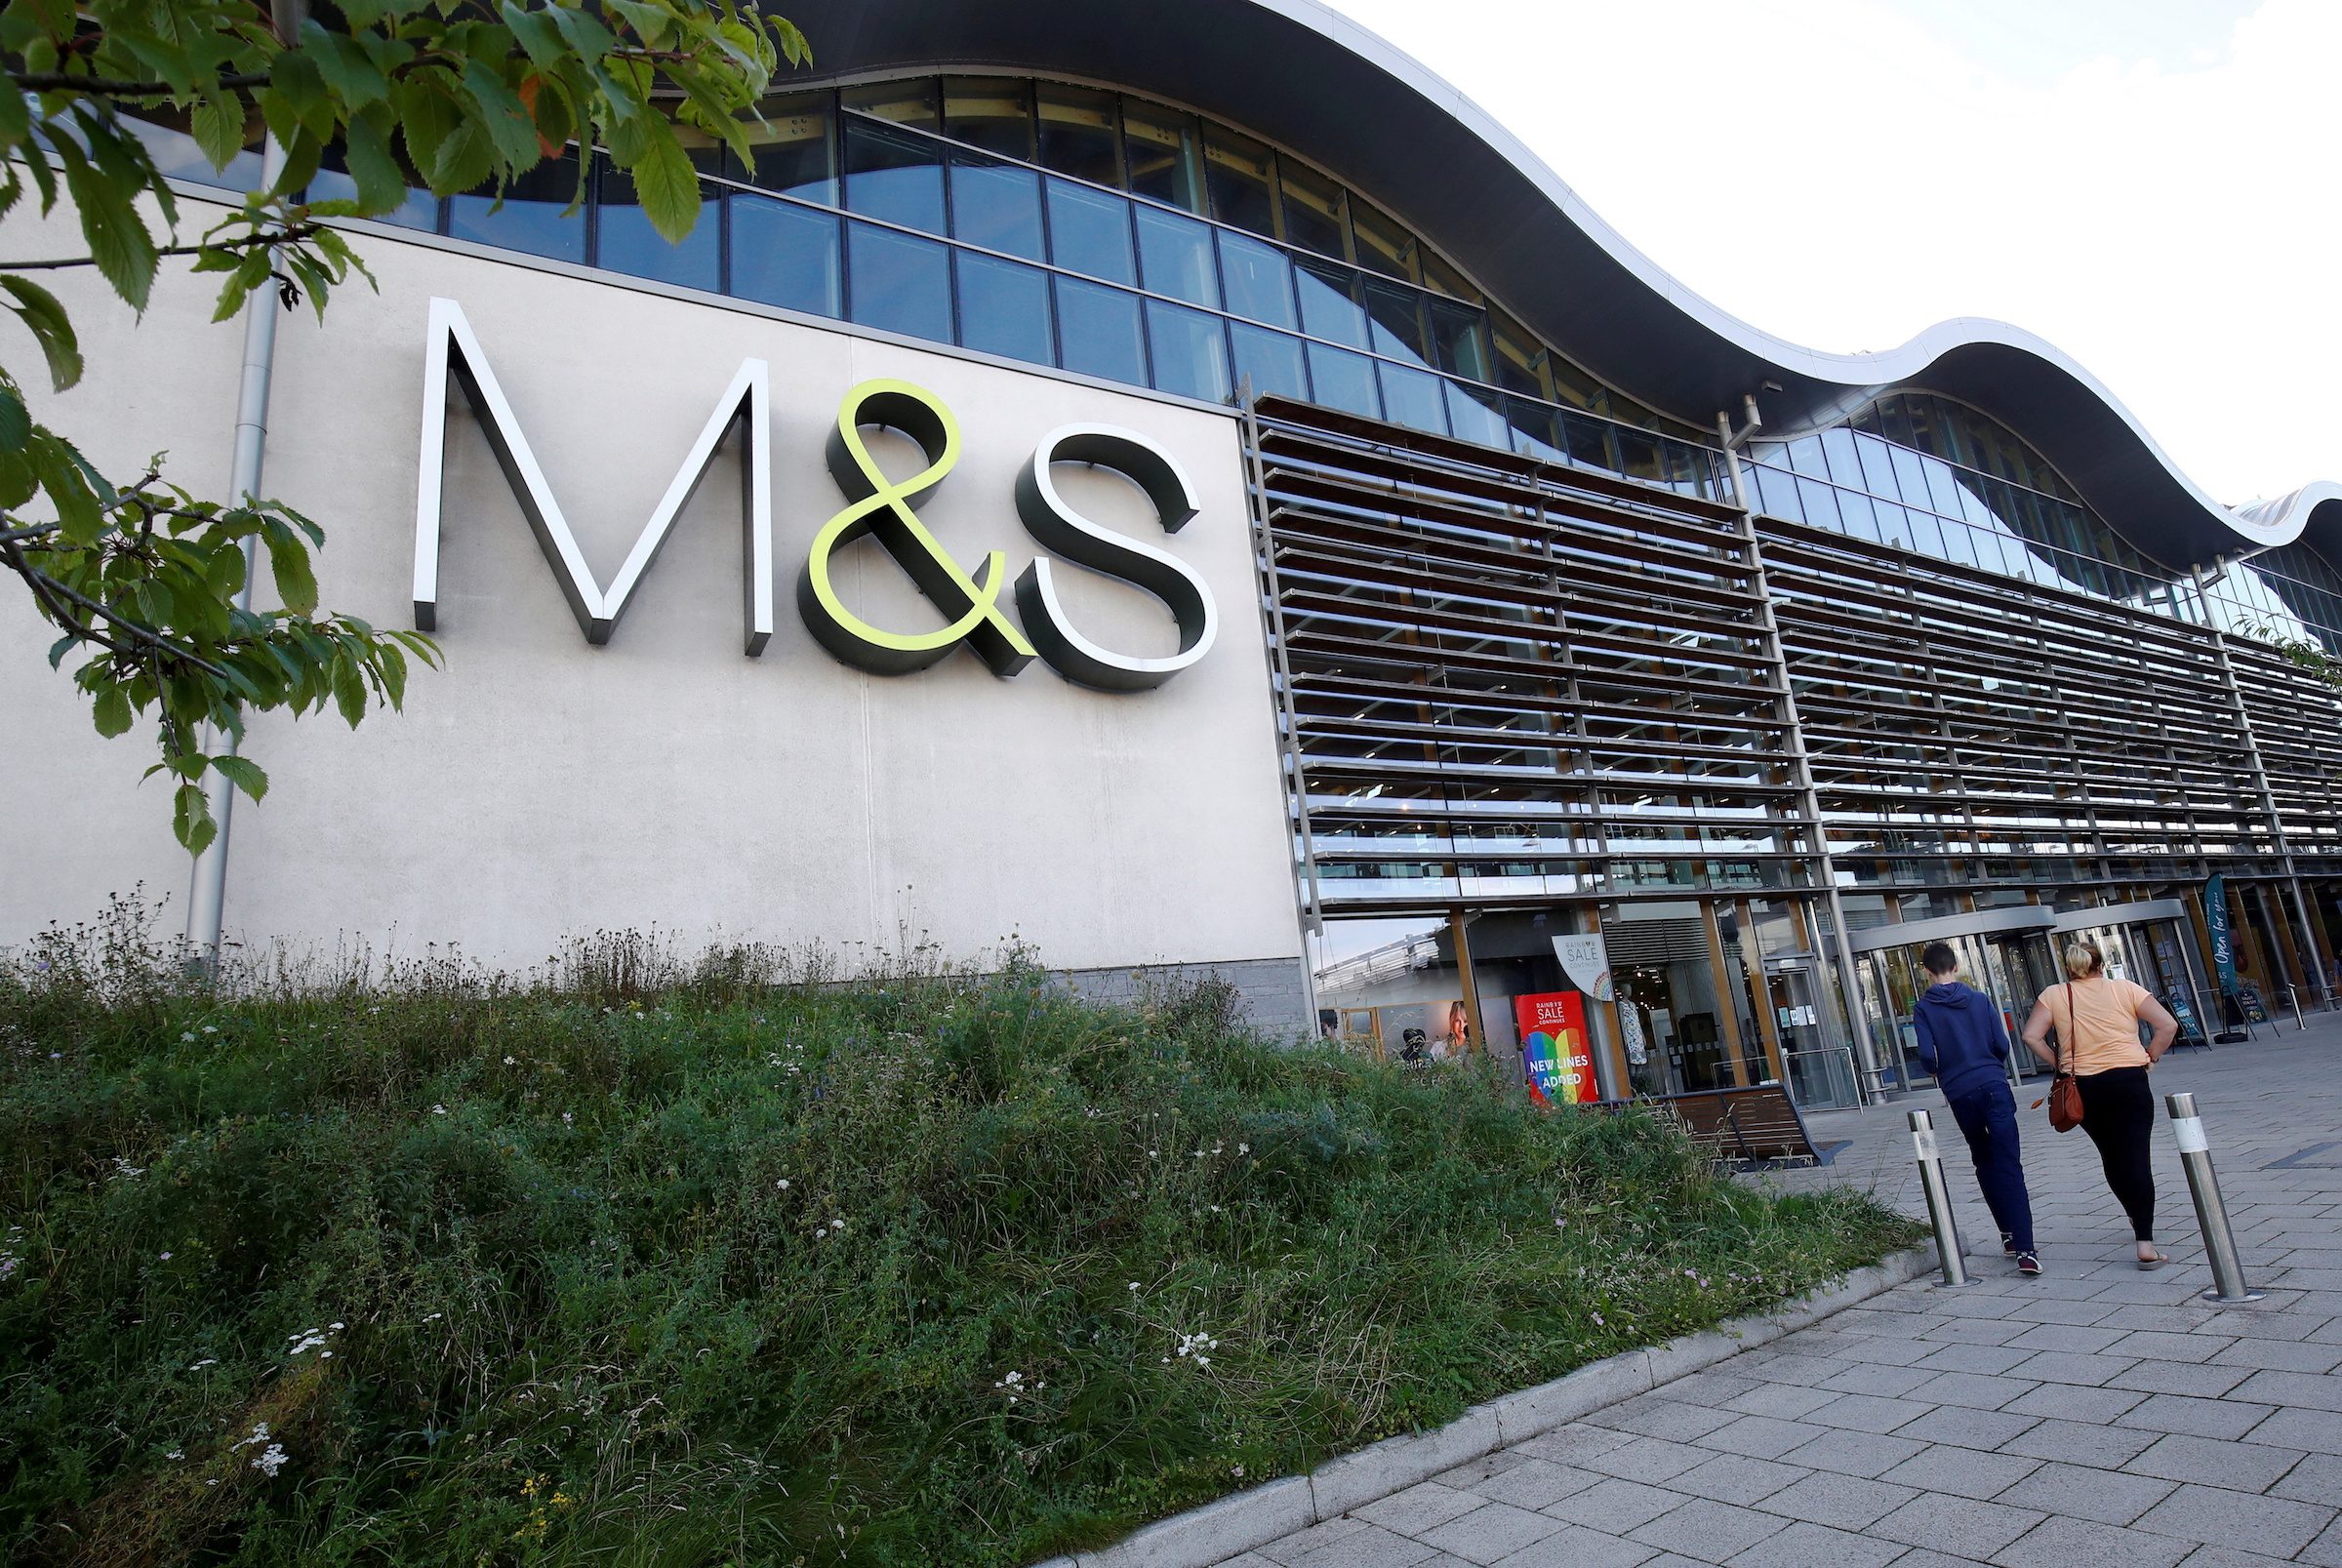 Britain’s Marks & Spencer aims to be fully net zero on emissions by 2040